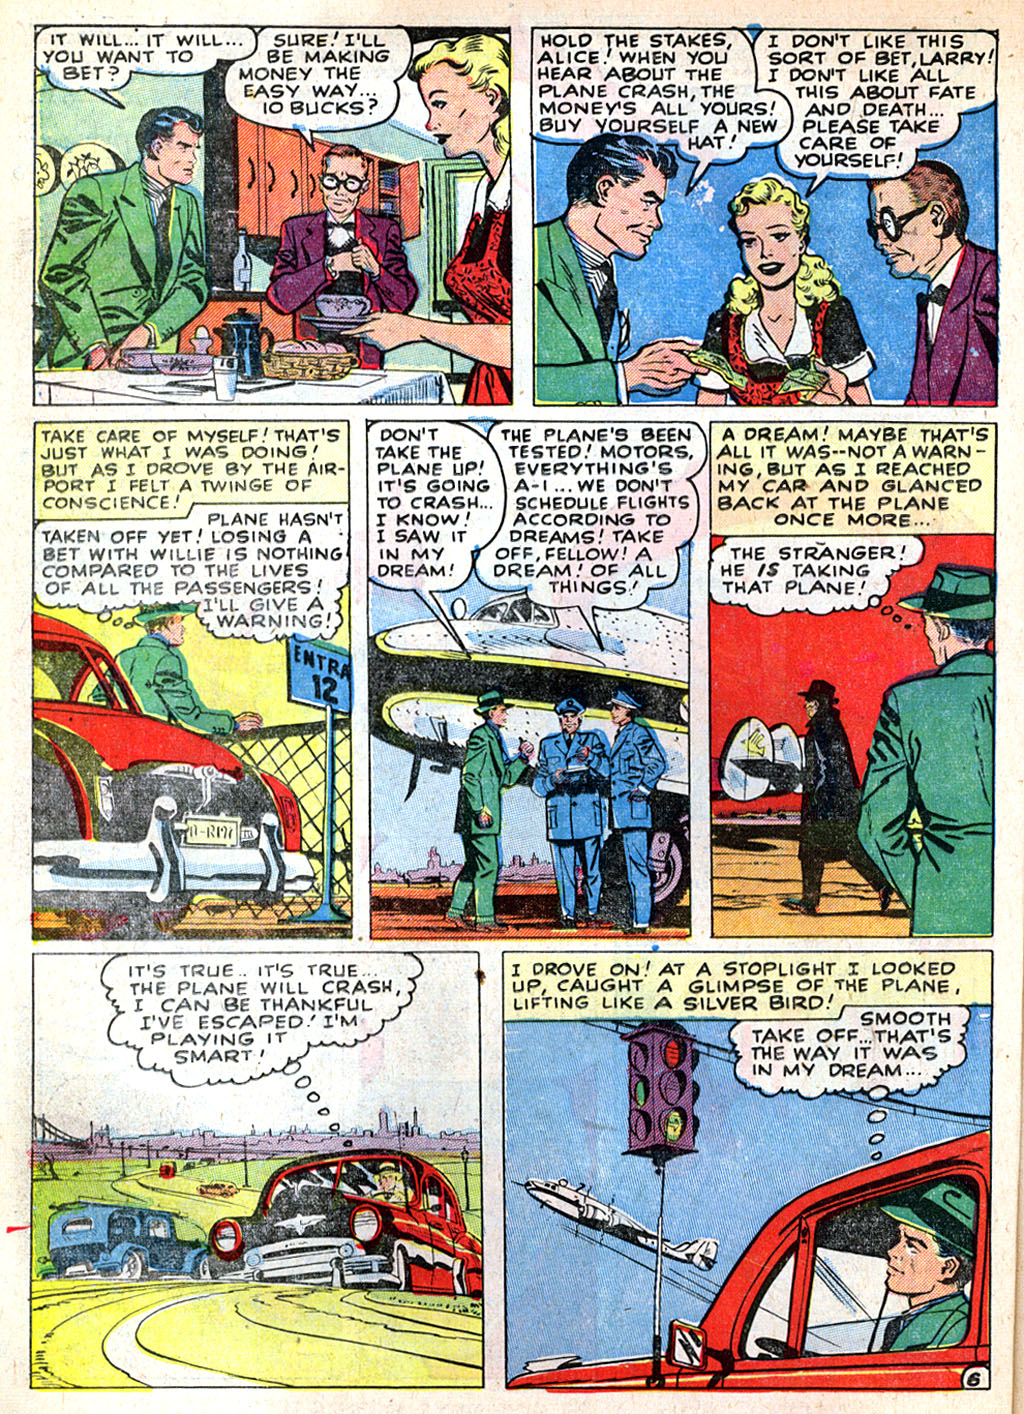 Marvel Tales (1949) 101 Page 7